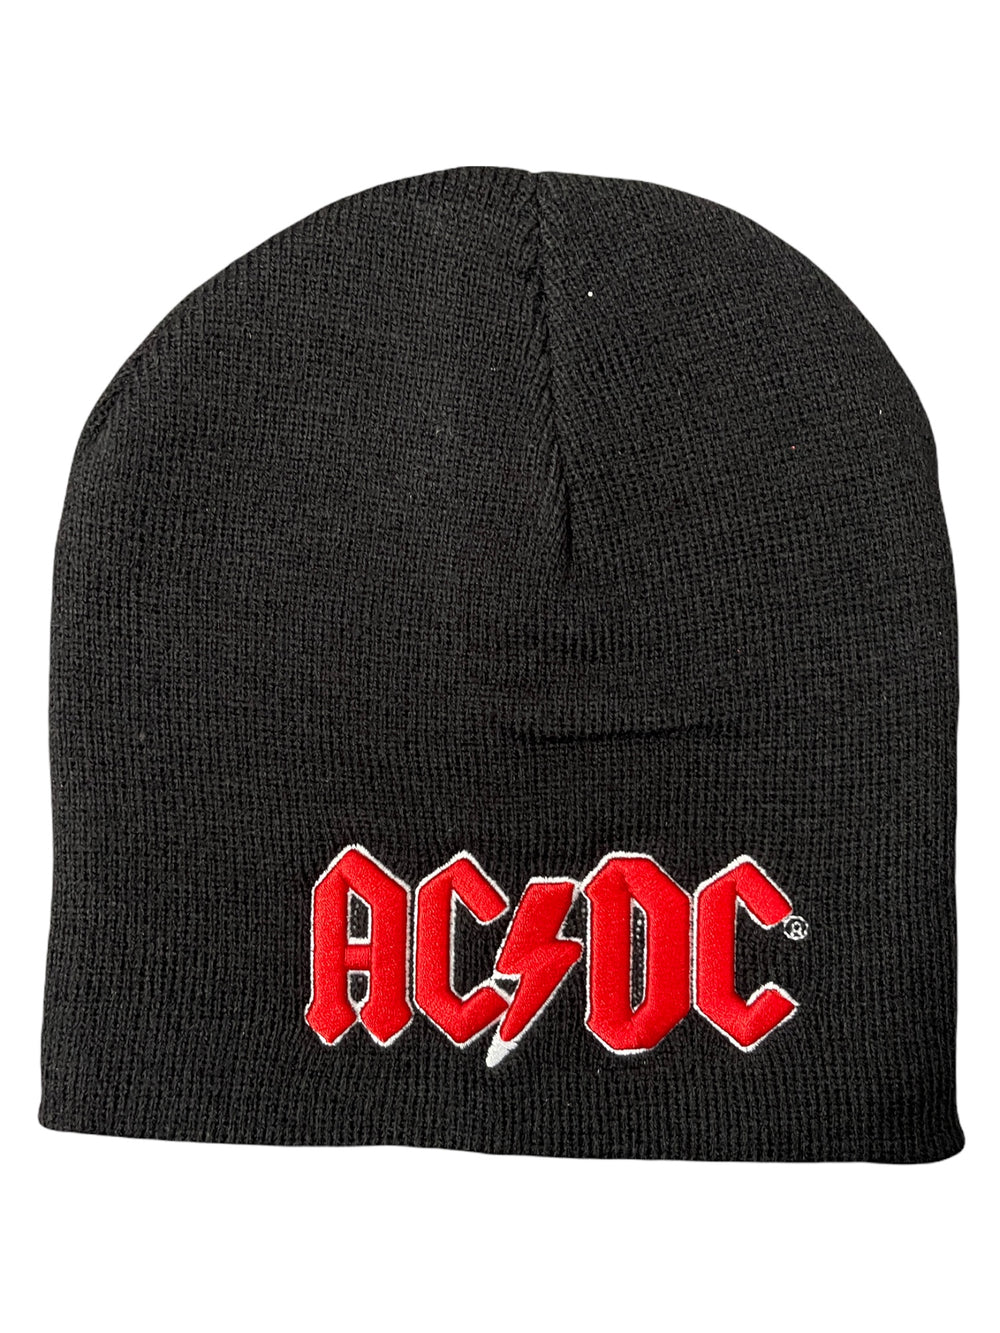 AC/DC - Red Logo Embroidery Official Beanie Hat One Size Fits All NEW